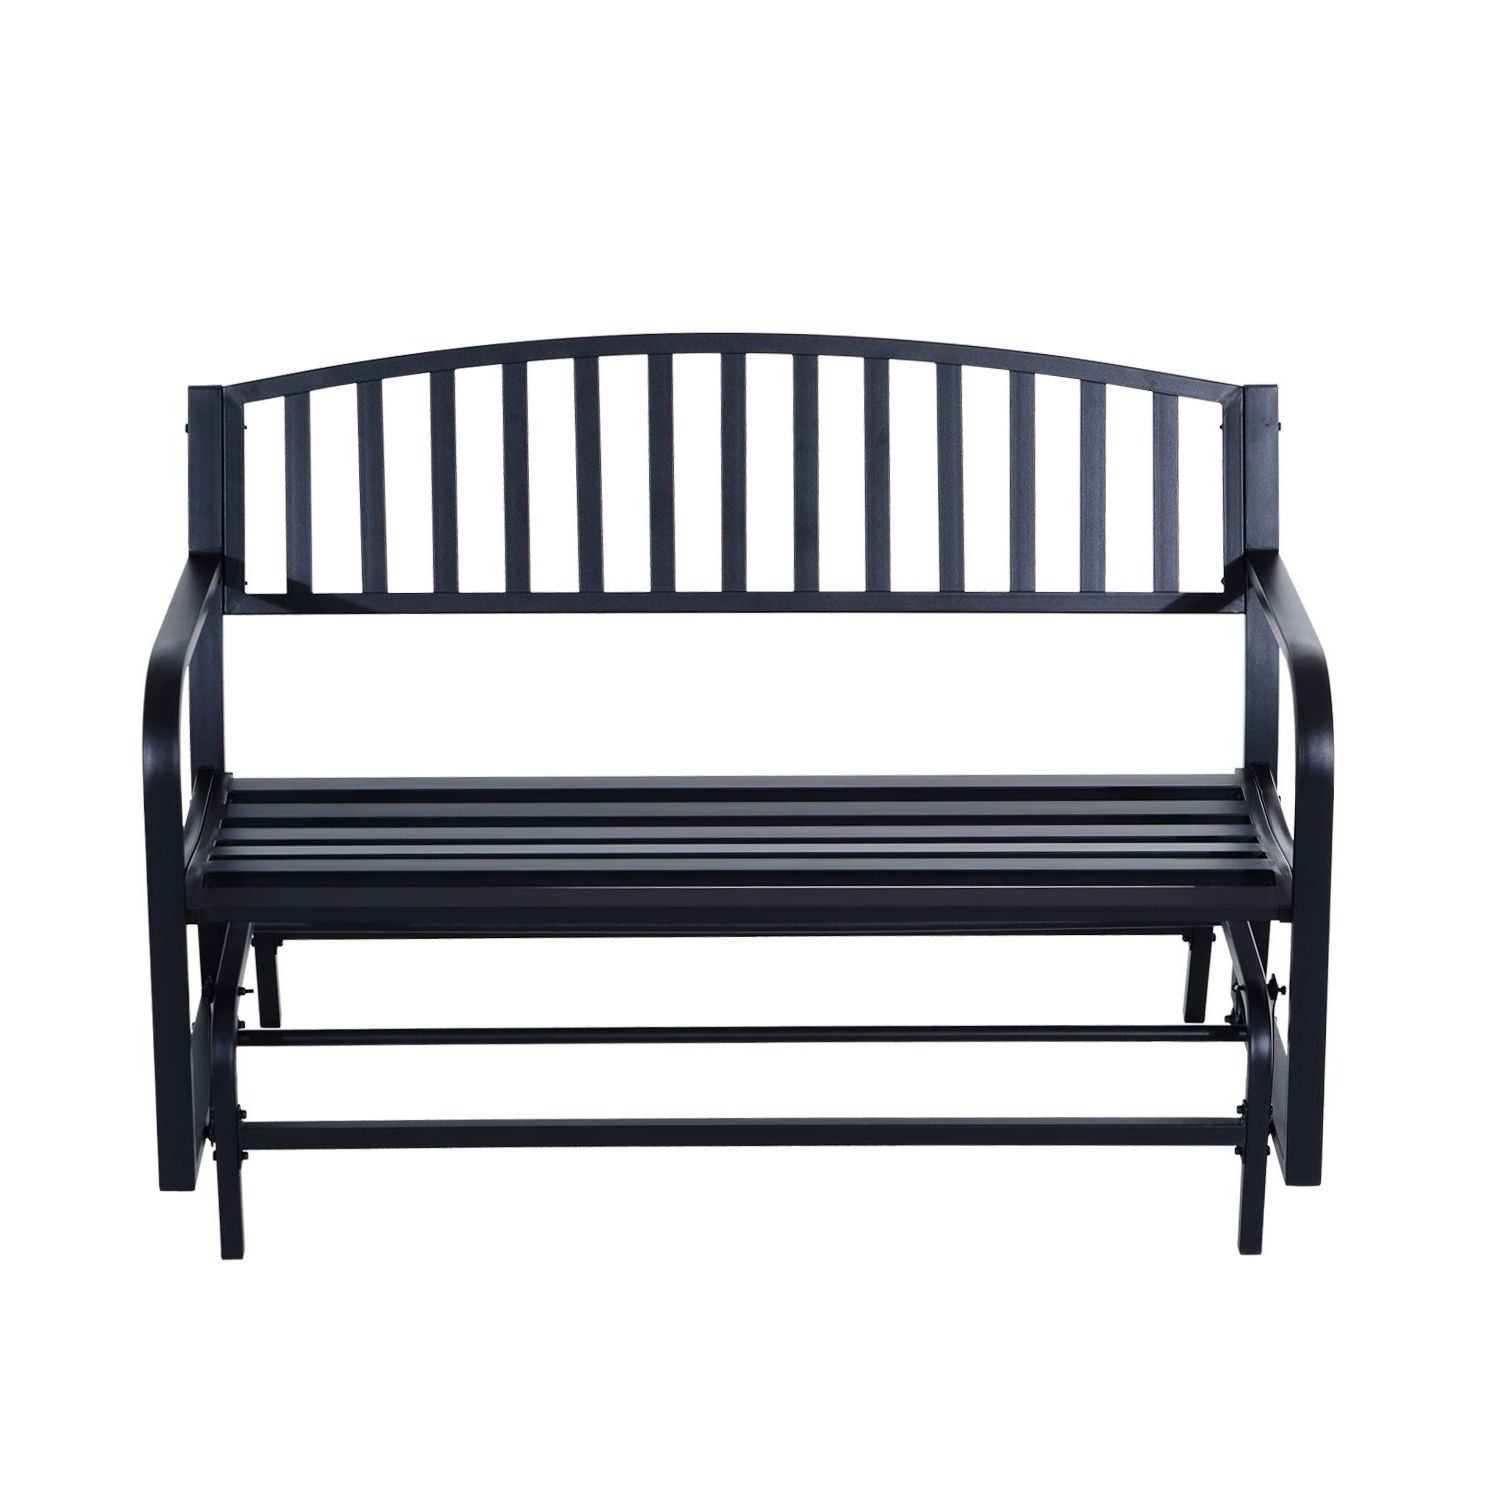 Outsunny 50 Inch Outdoor Steel Patio Swing Glider Bench – Black In Most Recently Released Steel Patio Swing Glider Benches (View 12 of 25)